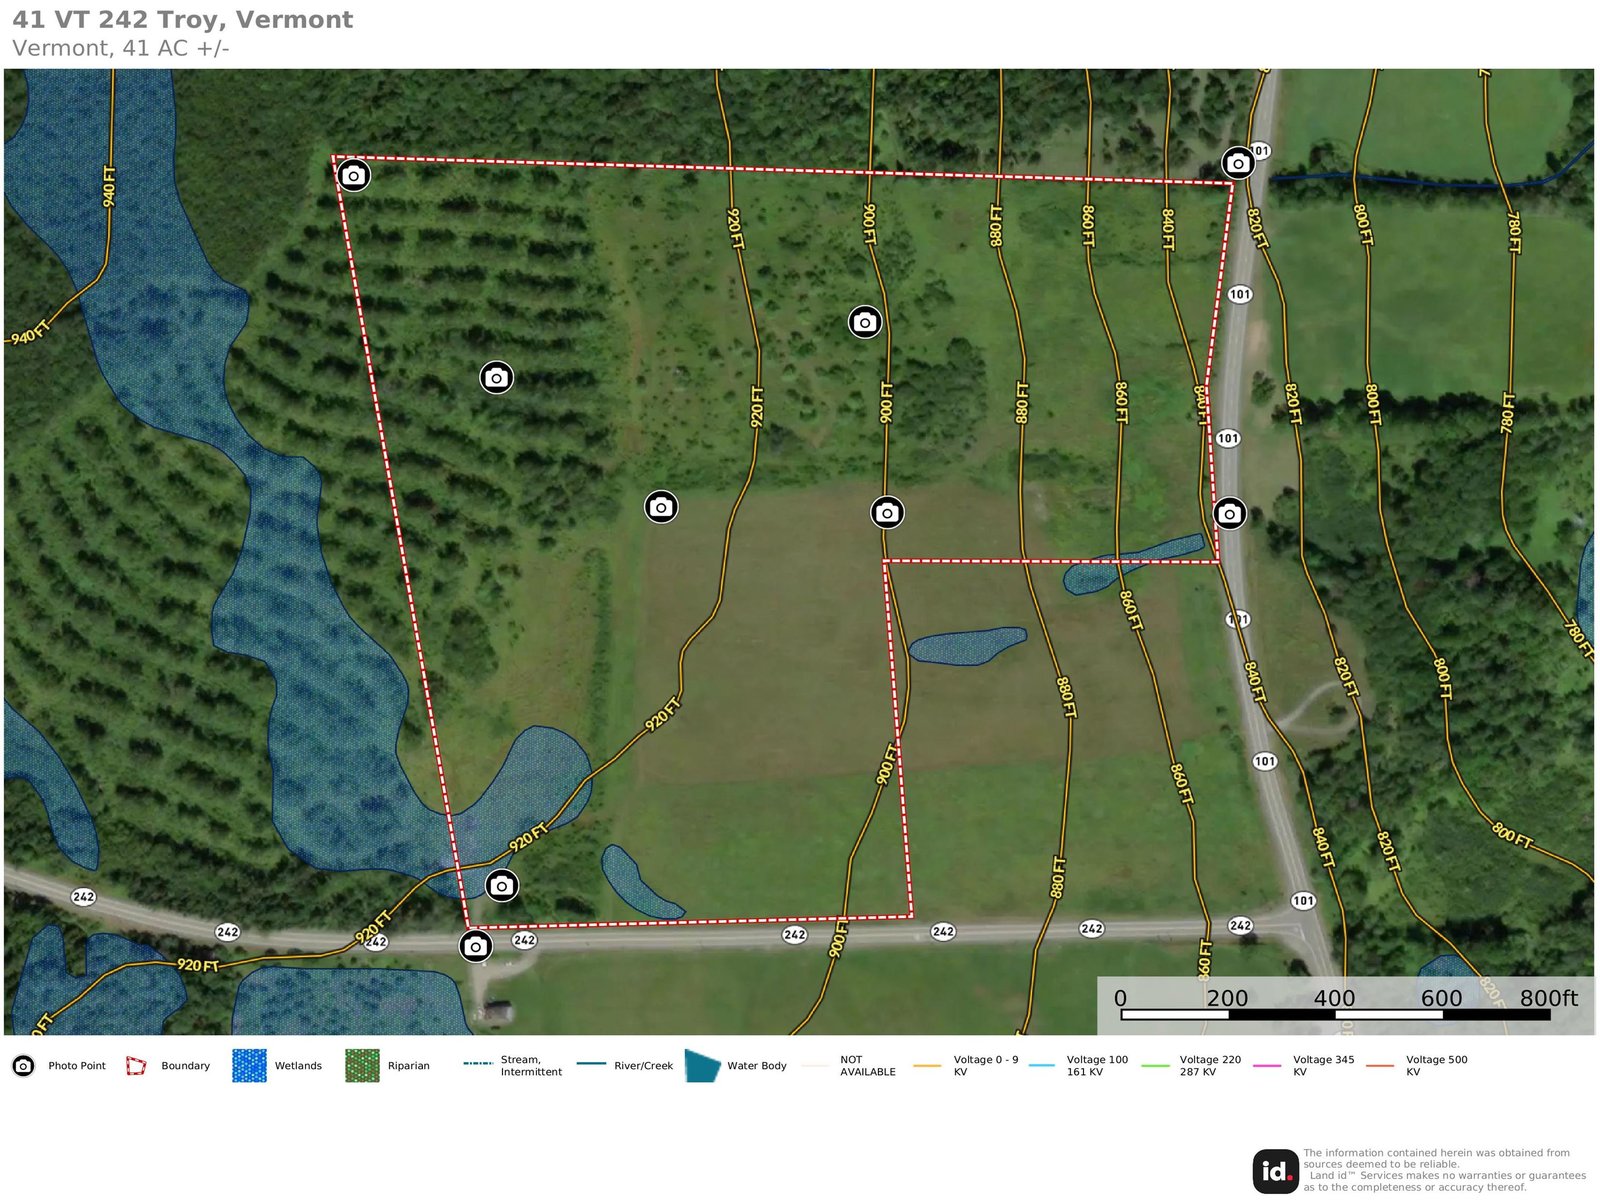 See virtual tour for dynamic mapping resources